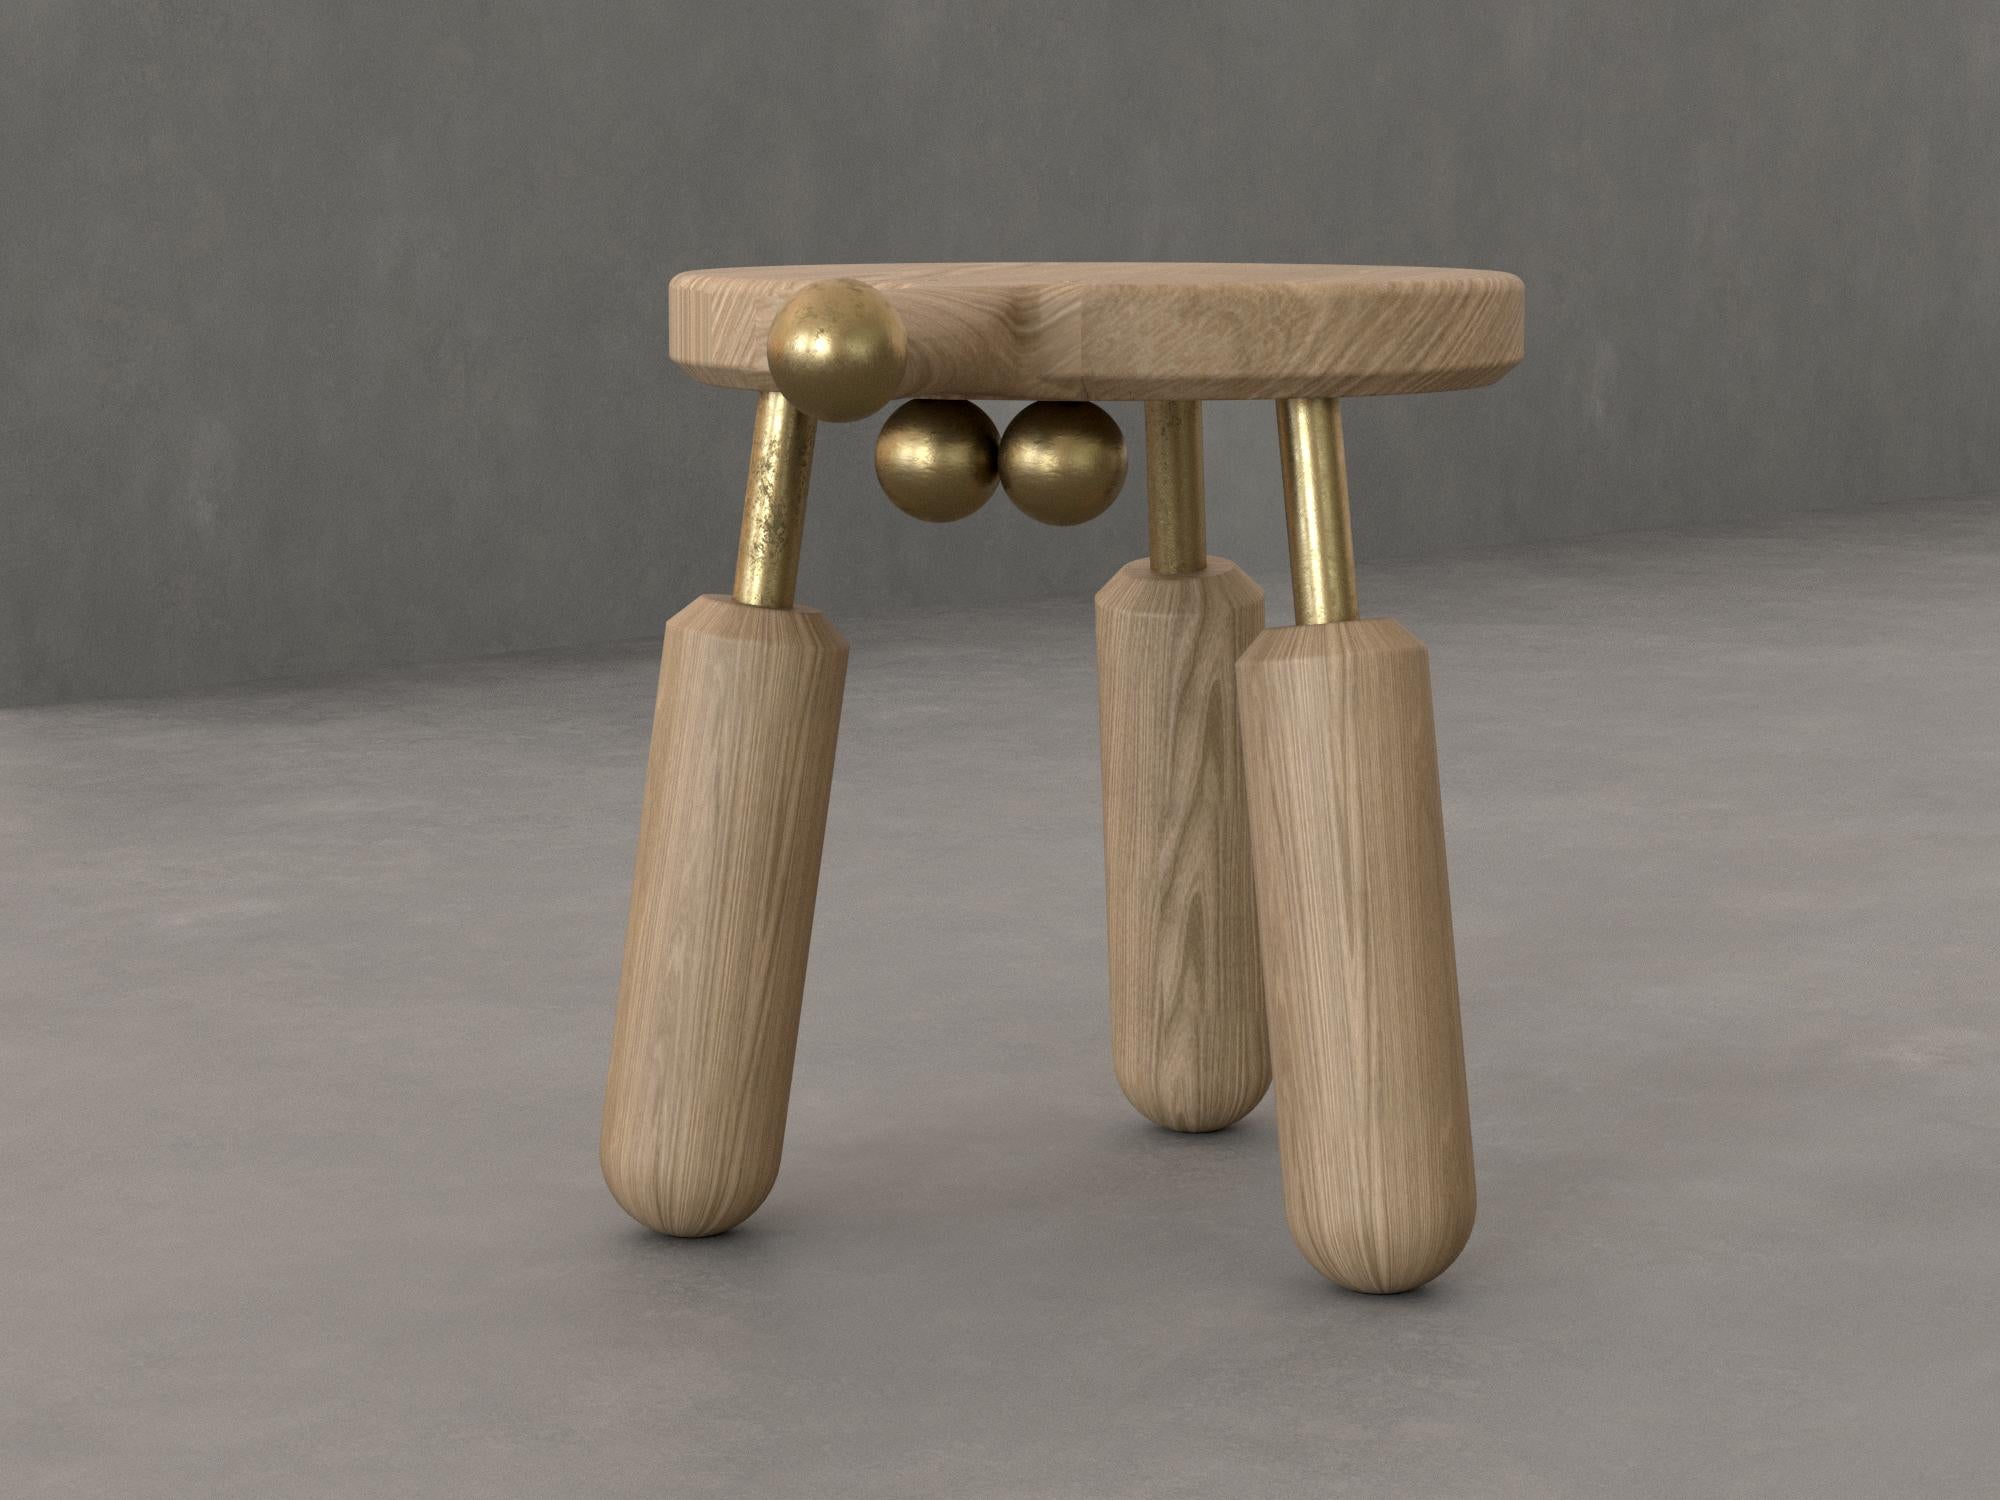 Introducing the Phallus stool.

This is a creation based on the traditional squatting stools used for farm or cooking tasks

We made a version with our interpretation.

We hope you love this pieces as much as we do!

Made with solid woods and